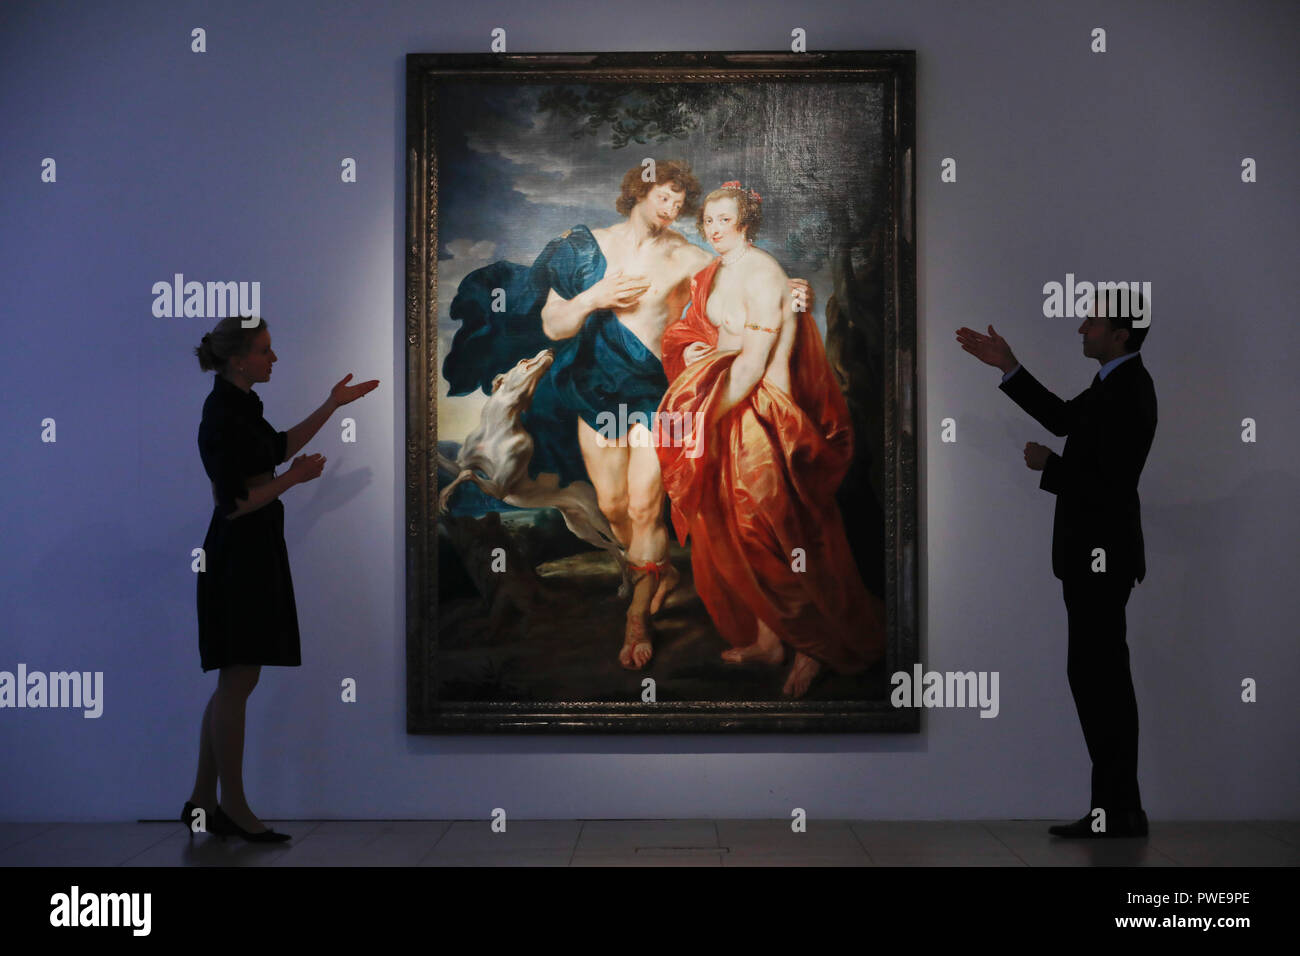 London, UK, 16th Oct 2018. Christie's employees discuss Dutch master Anthony Van Dyck 's work 'Venus and Adonis' at Christie's AuctionHouse in London, UK, Tuesday October 16, 2017. The piece is expected to achieve up to £3.5million when is comes to auction as part of the Albada Jelgersma Collection sale during Christie's Classic Week in December. Photograph : Credit: Luke MacGregor/Alamy Live News Stock Photo